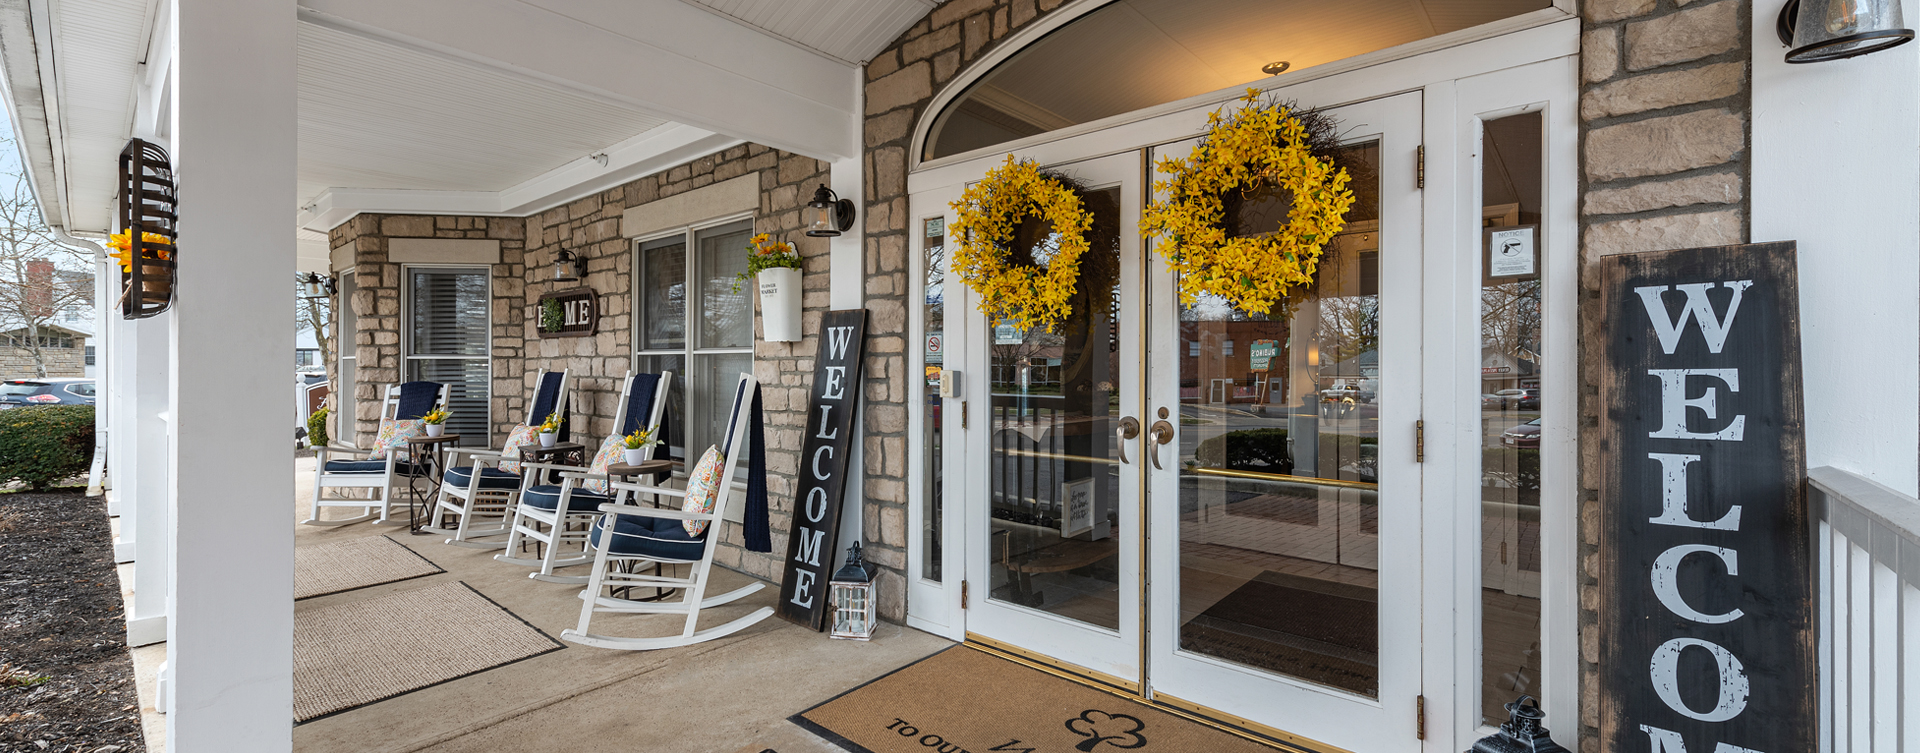 Sip on your favorite drink on the porch at Bickford of Bexley